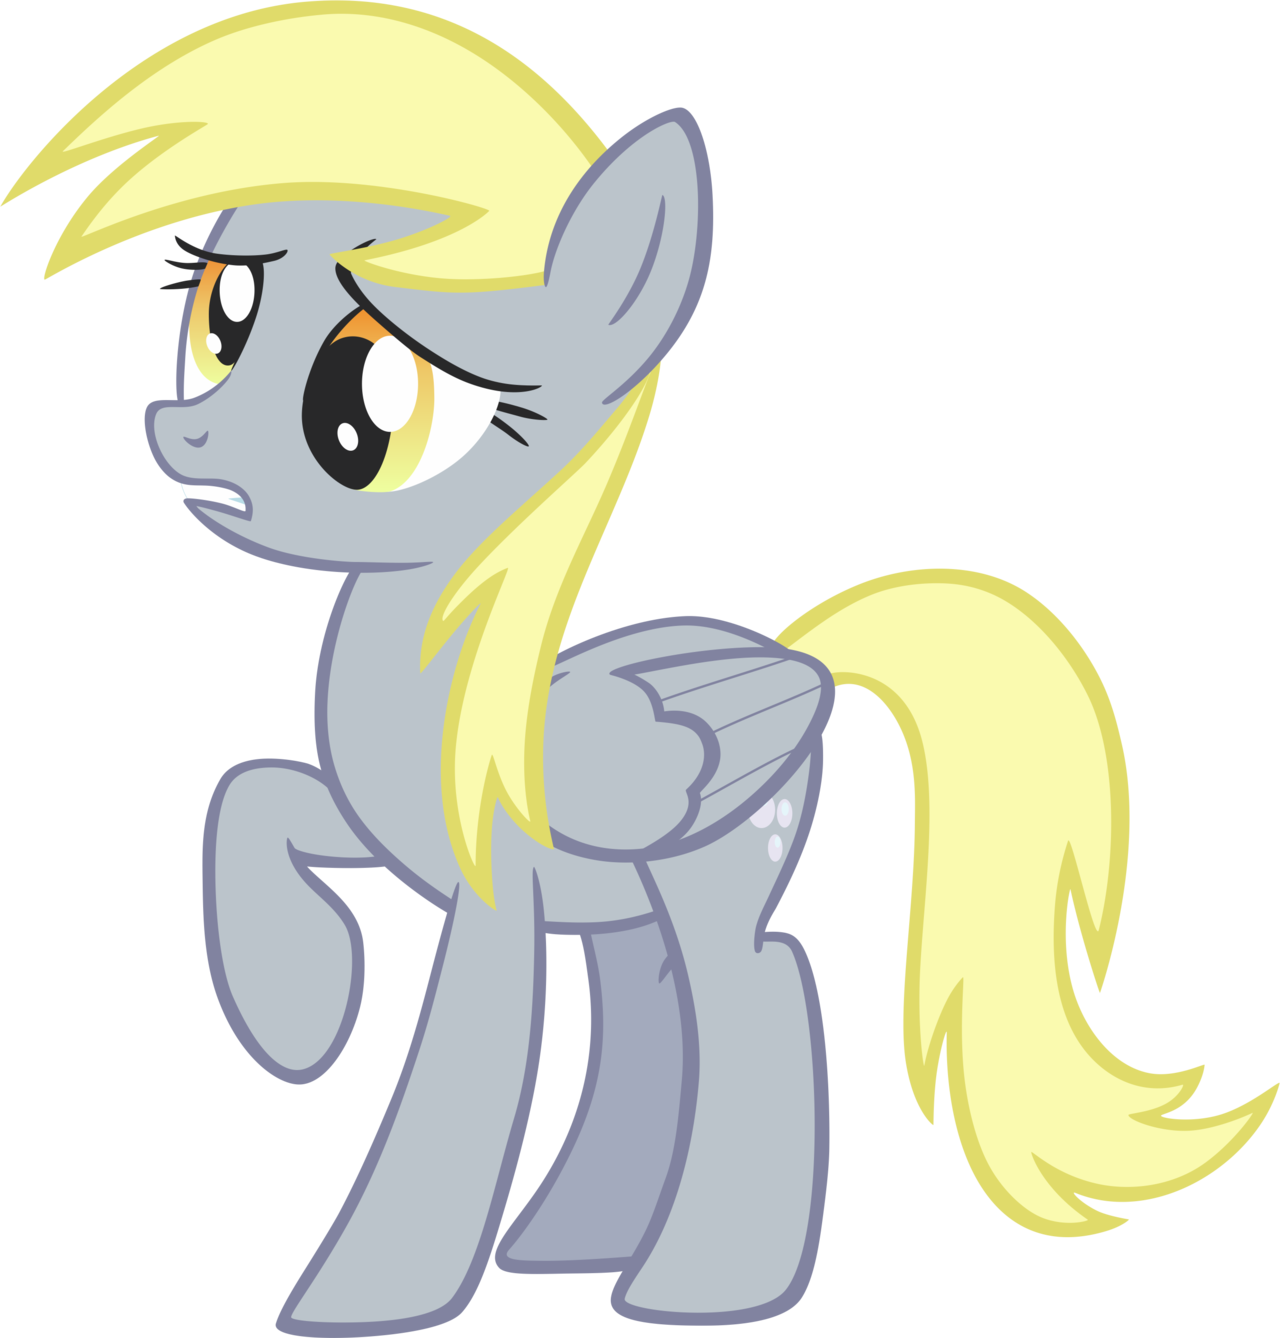 derpy_hooves_by_greseres-d4tlzgf.png